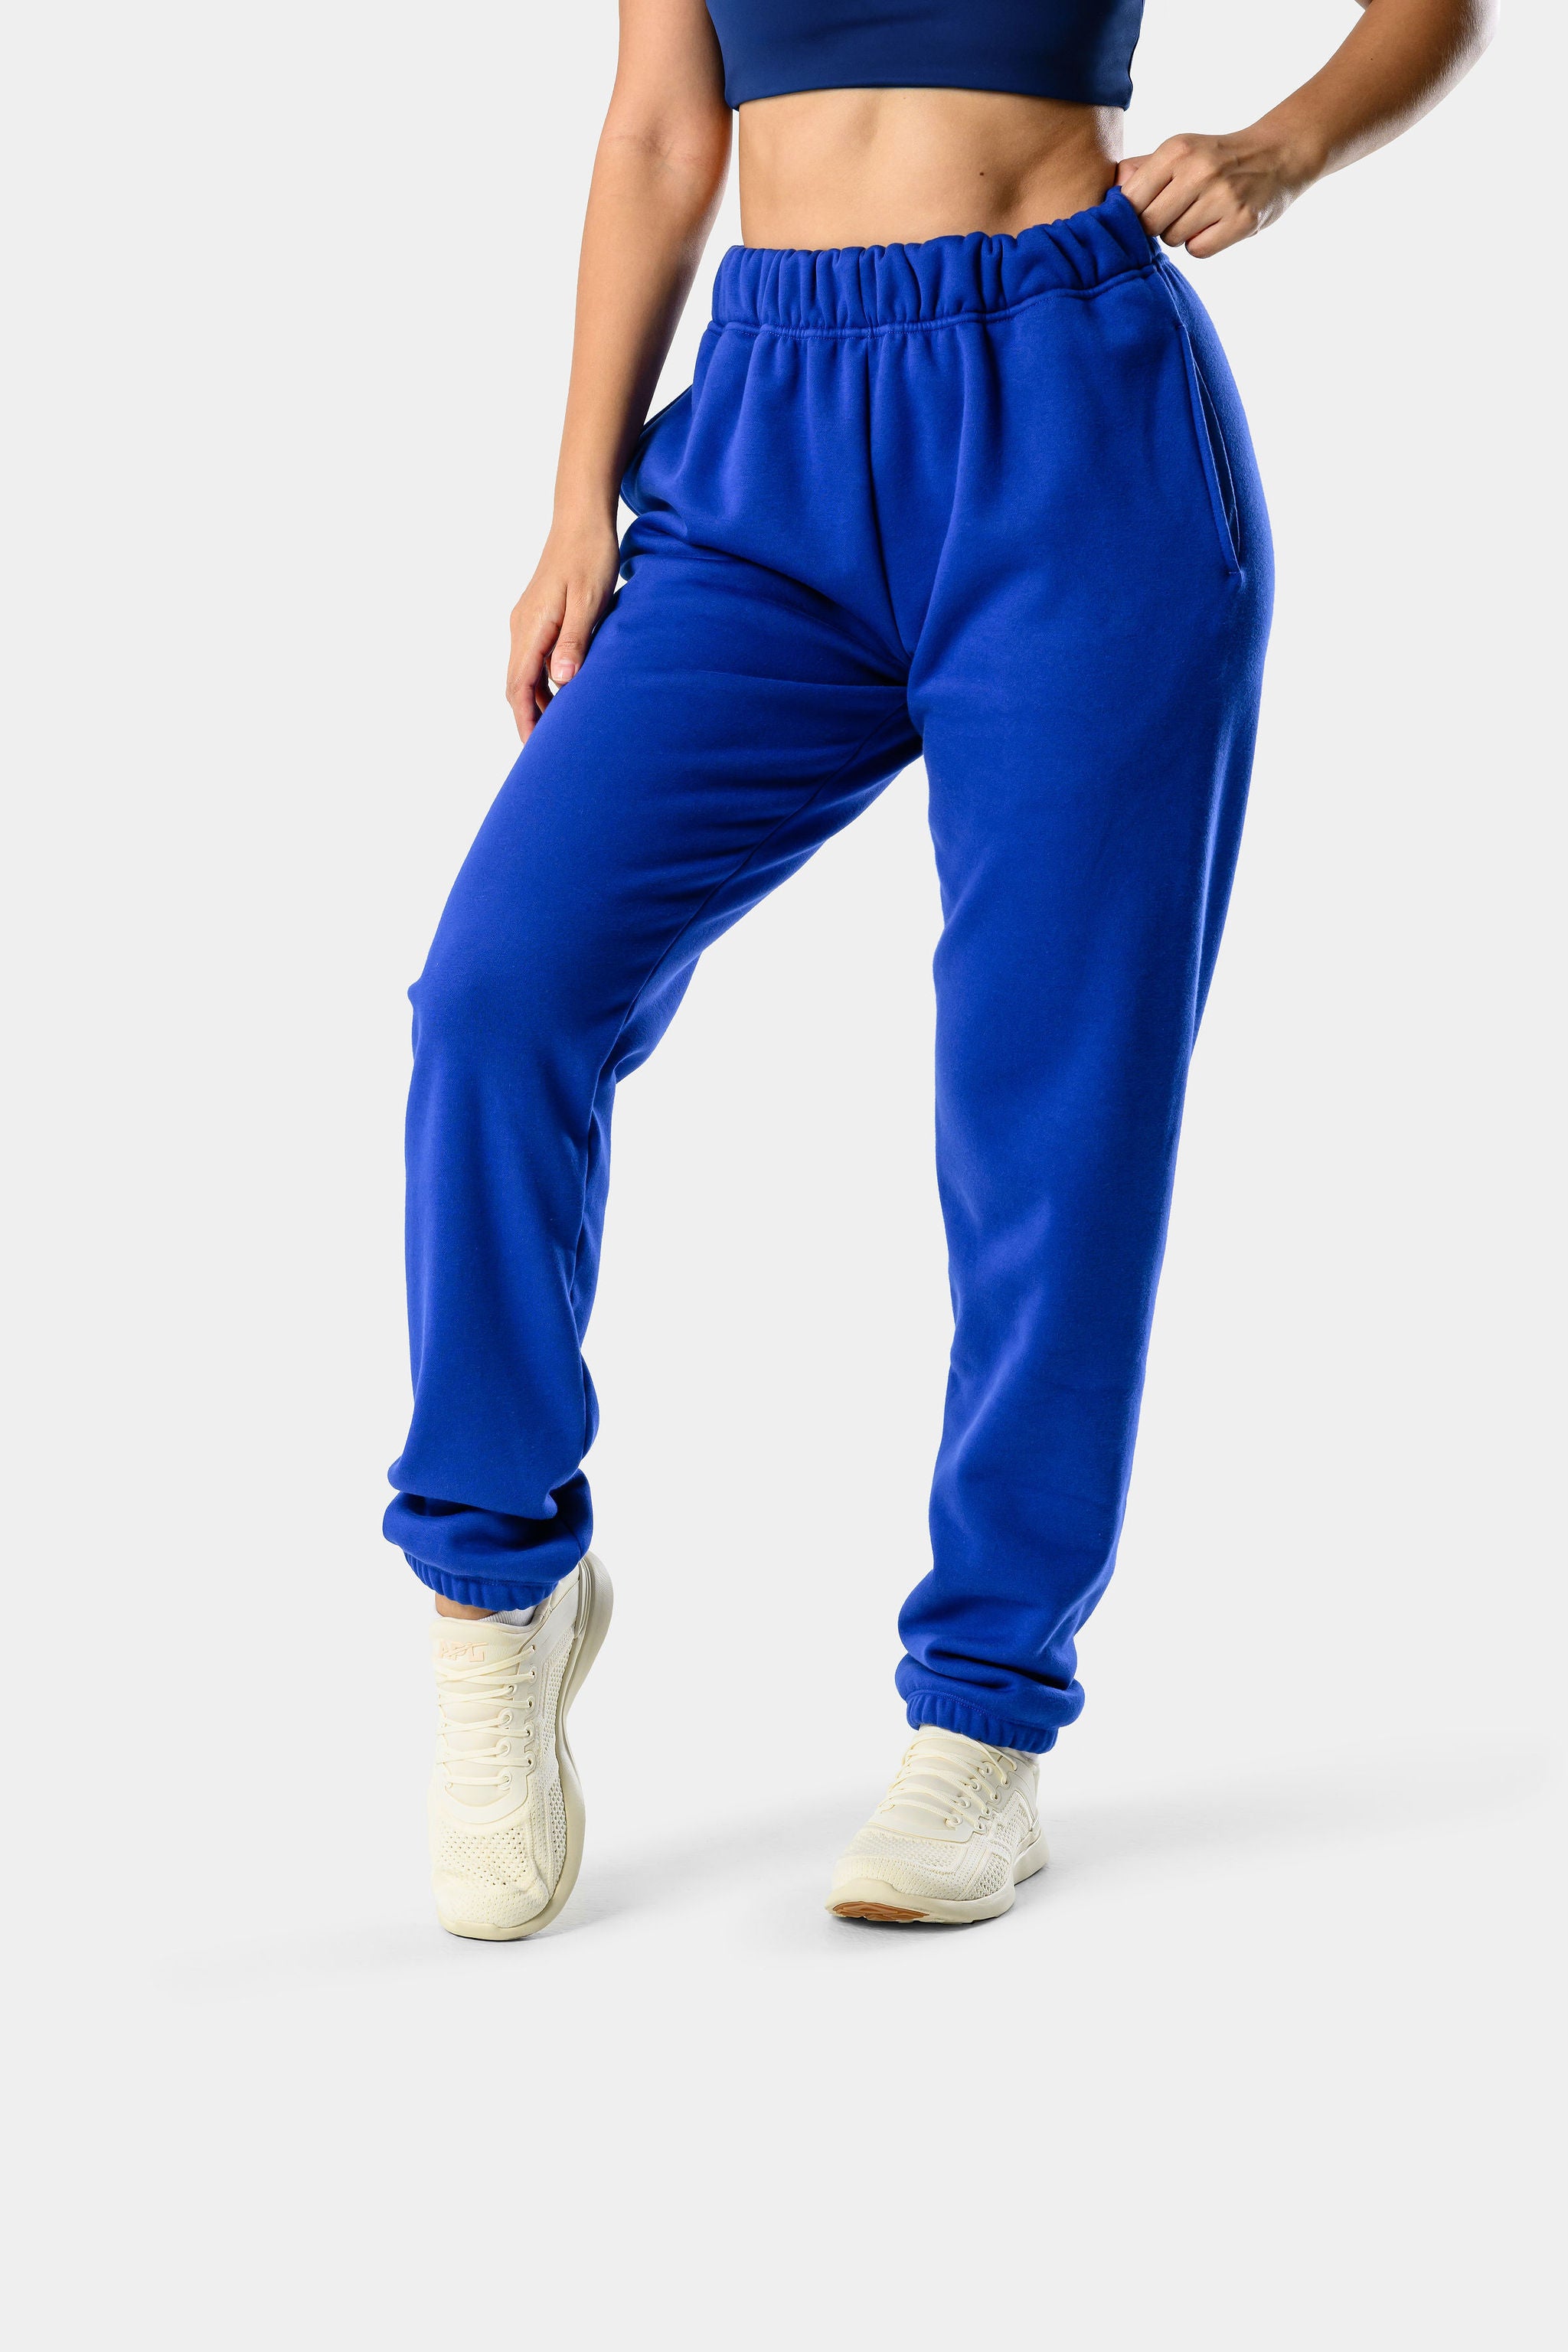 Kamo Fitness CozyTec High-Waisted Sweatpants for Women Baggy: - Import It  All